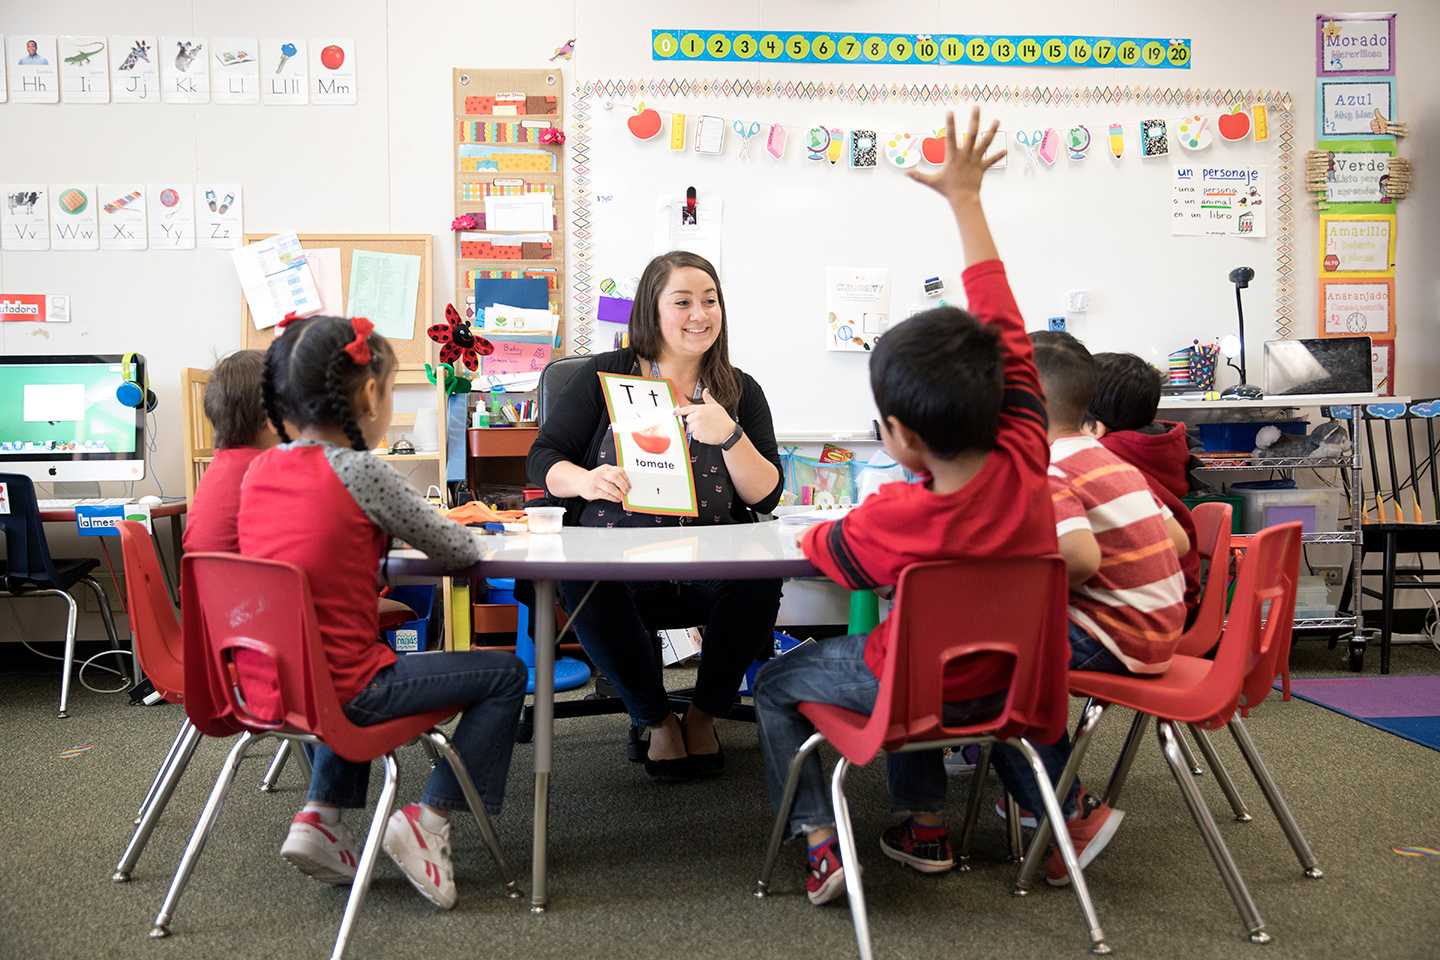 Elementary teacher Jacqueline Lujan sitting at a table in a classroom with children